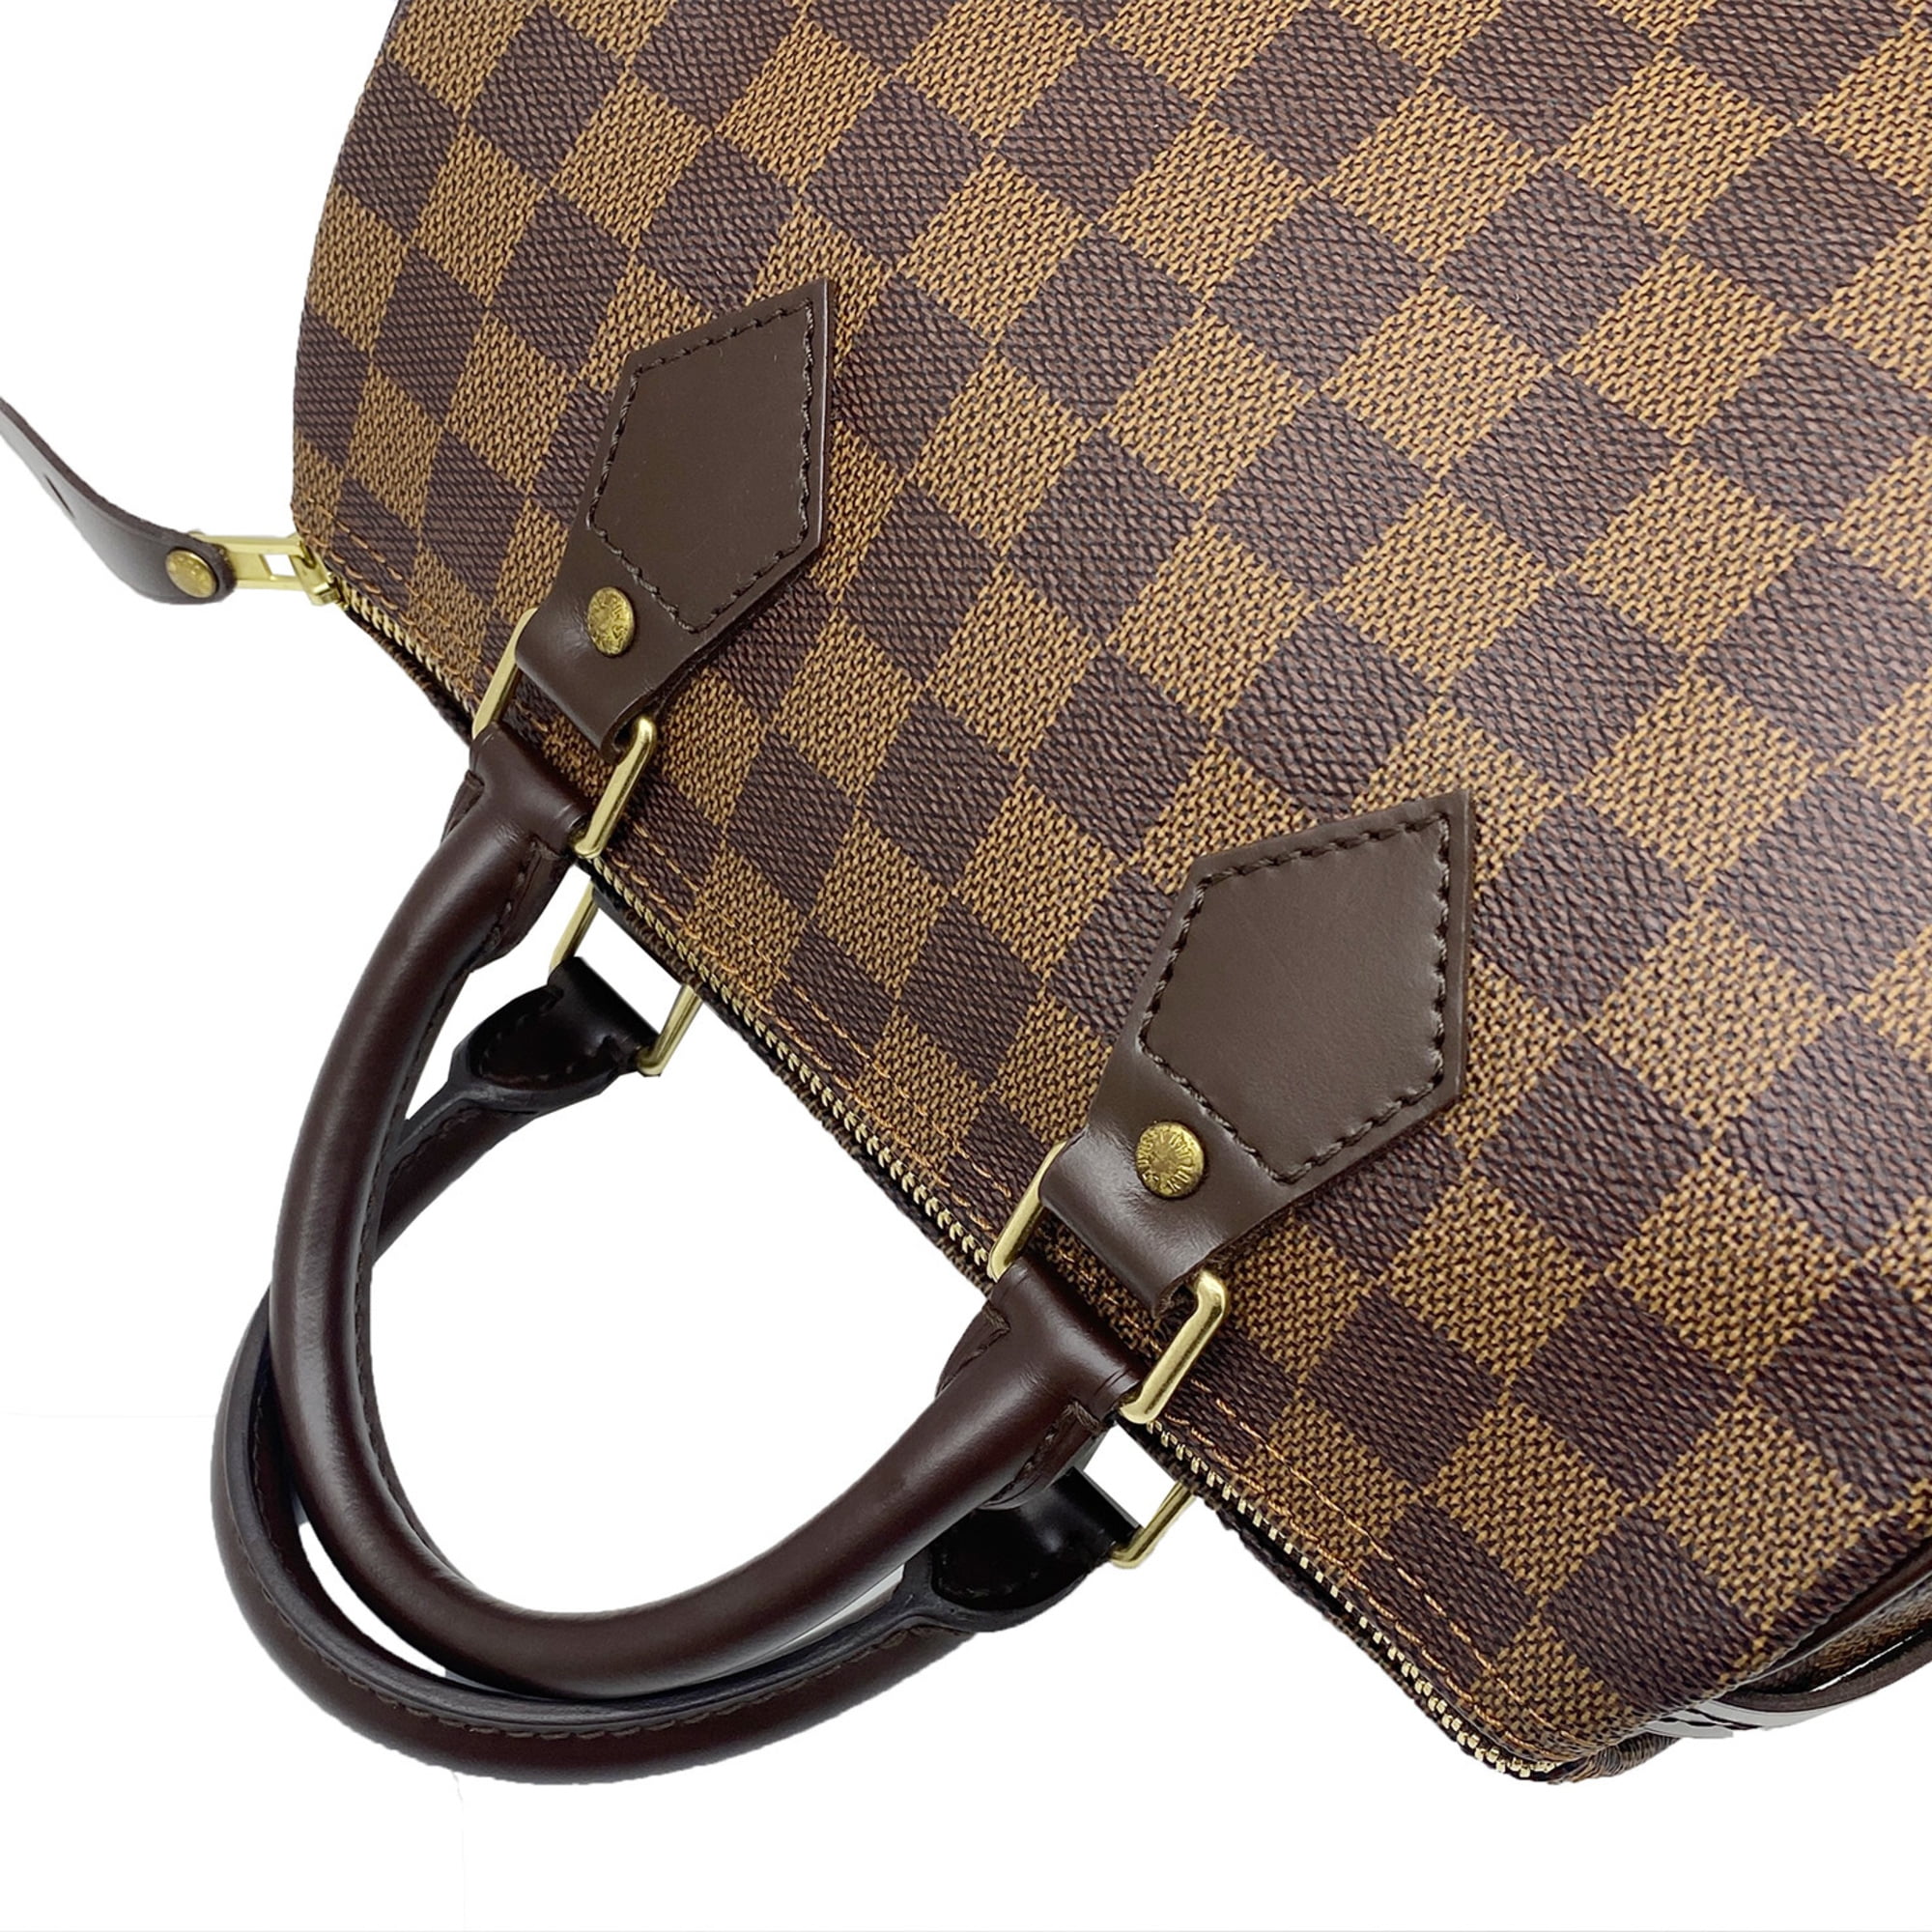 used Unisex Pre-owned Authenticated Louis Vuitton Monogram Speedy 25 Canvas Brown Boston Bag Top HandleBag, Adult Unisex, Size: Small